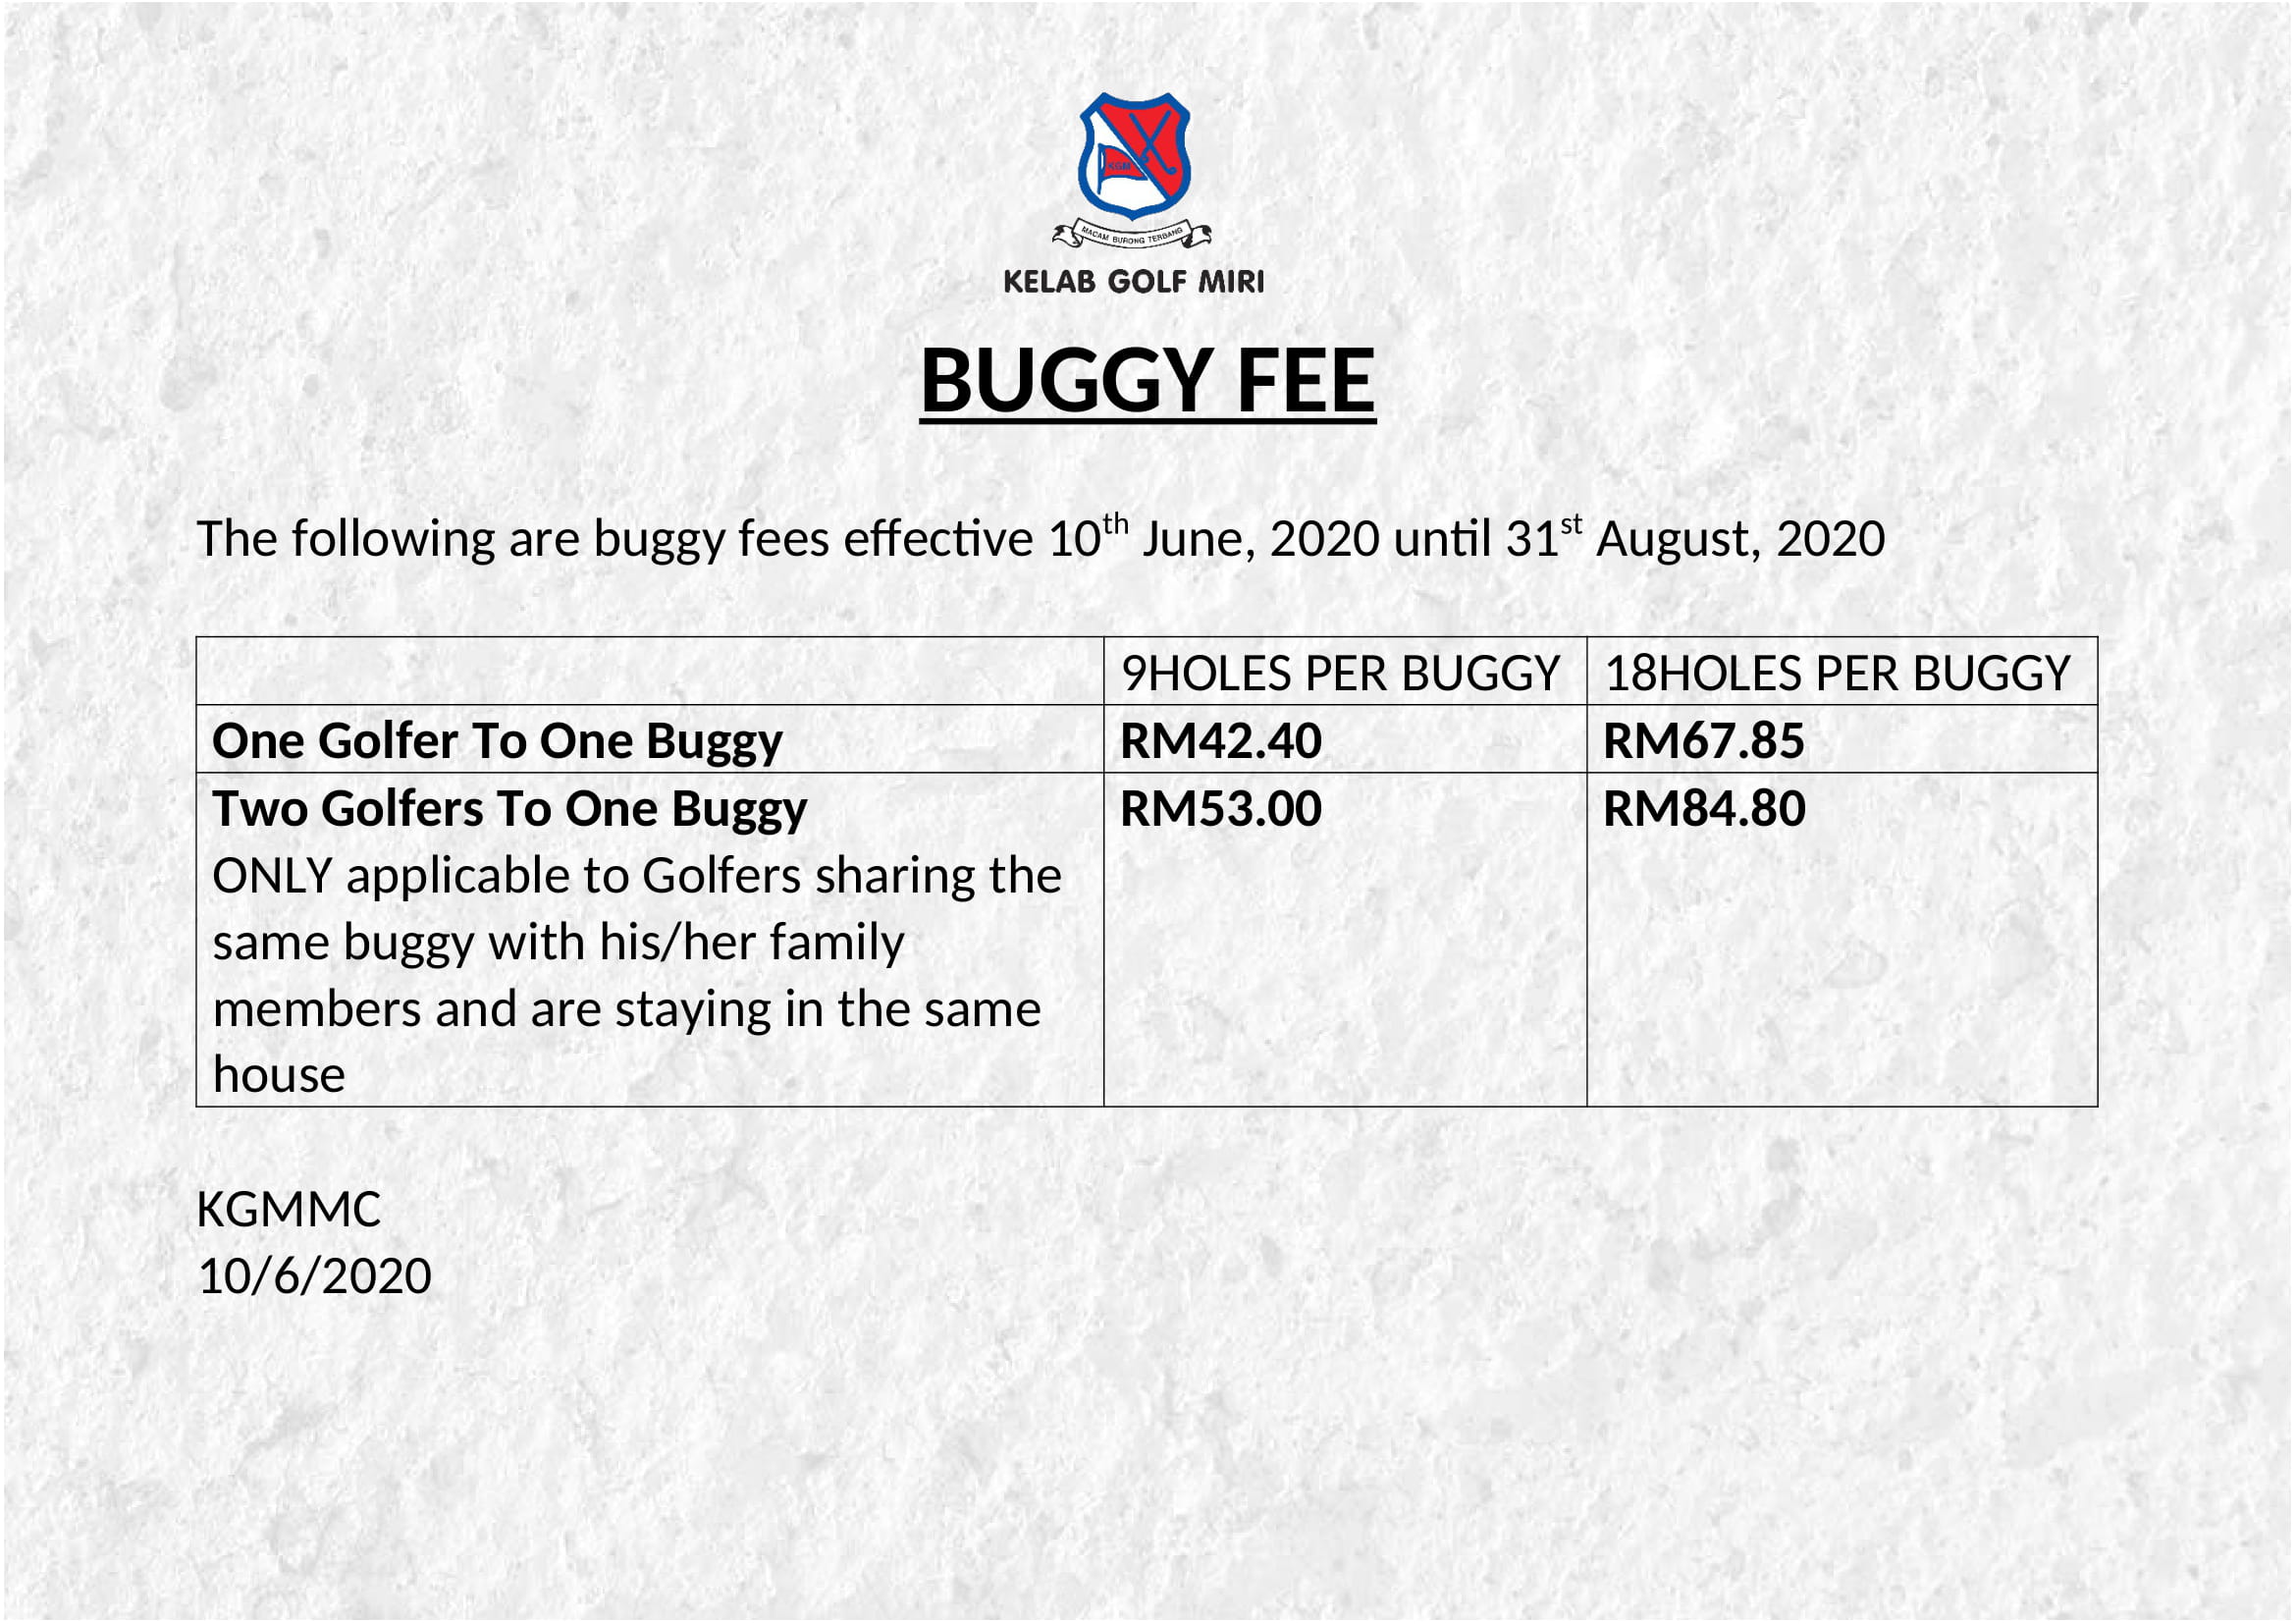 BUGGY FEE rmco 2020 6 10 -2020 8 31-1